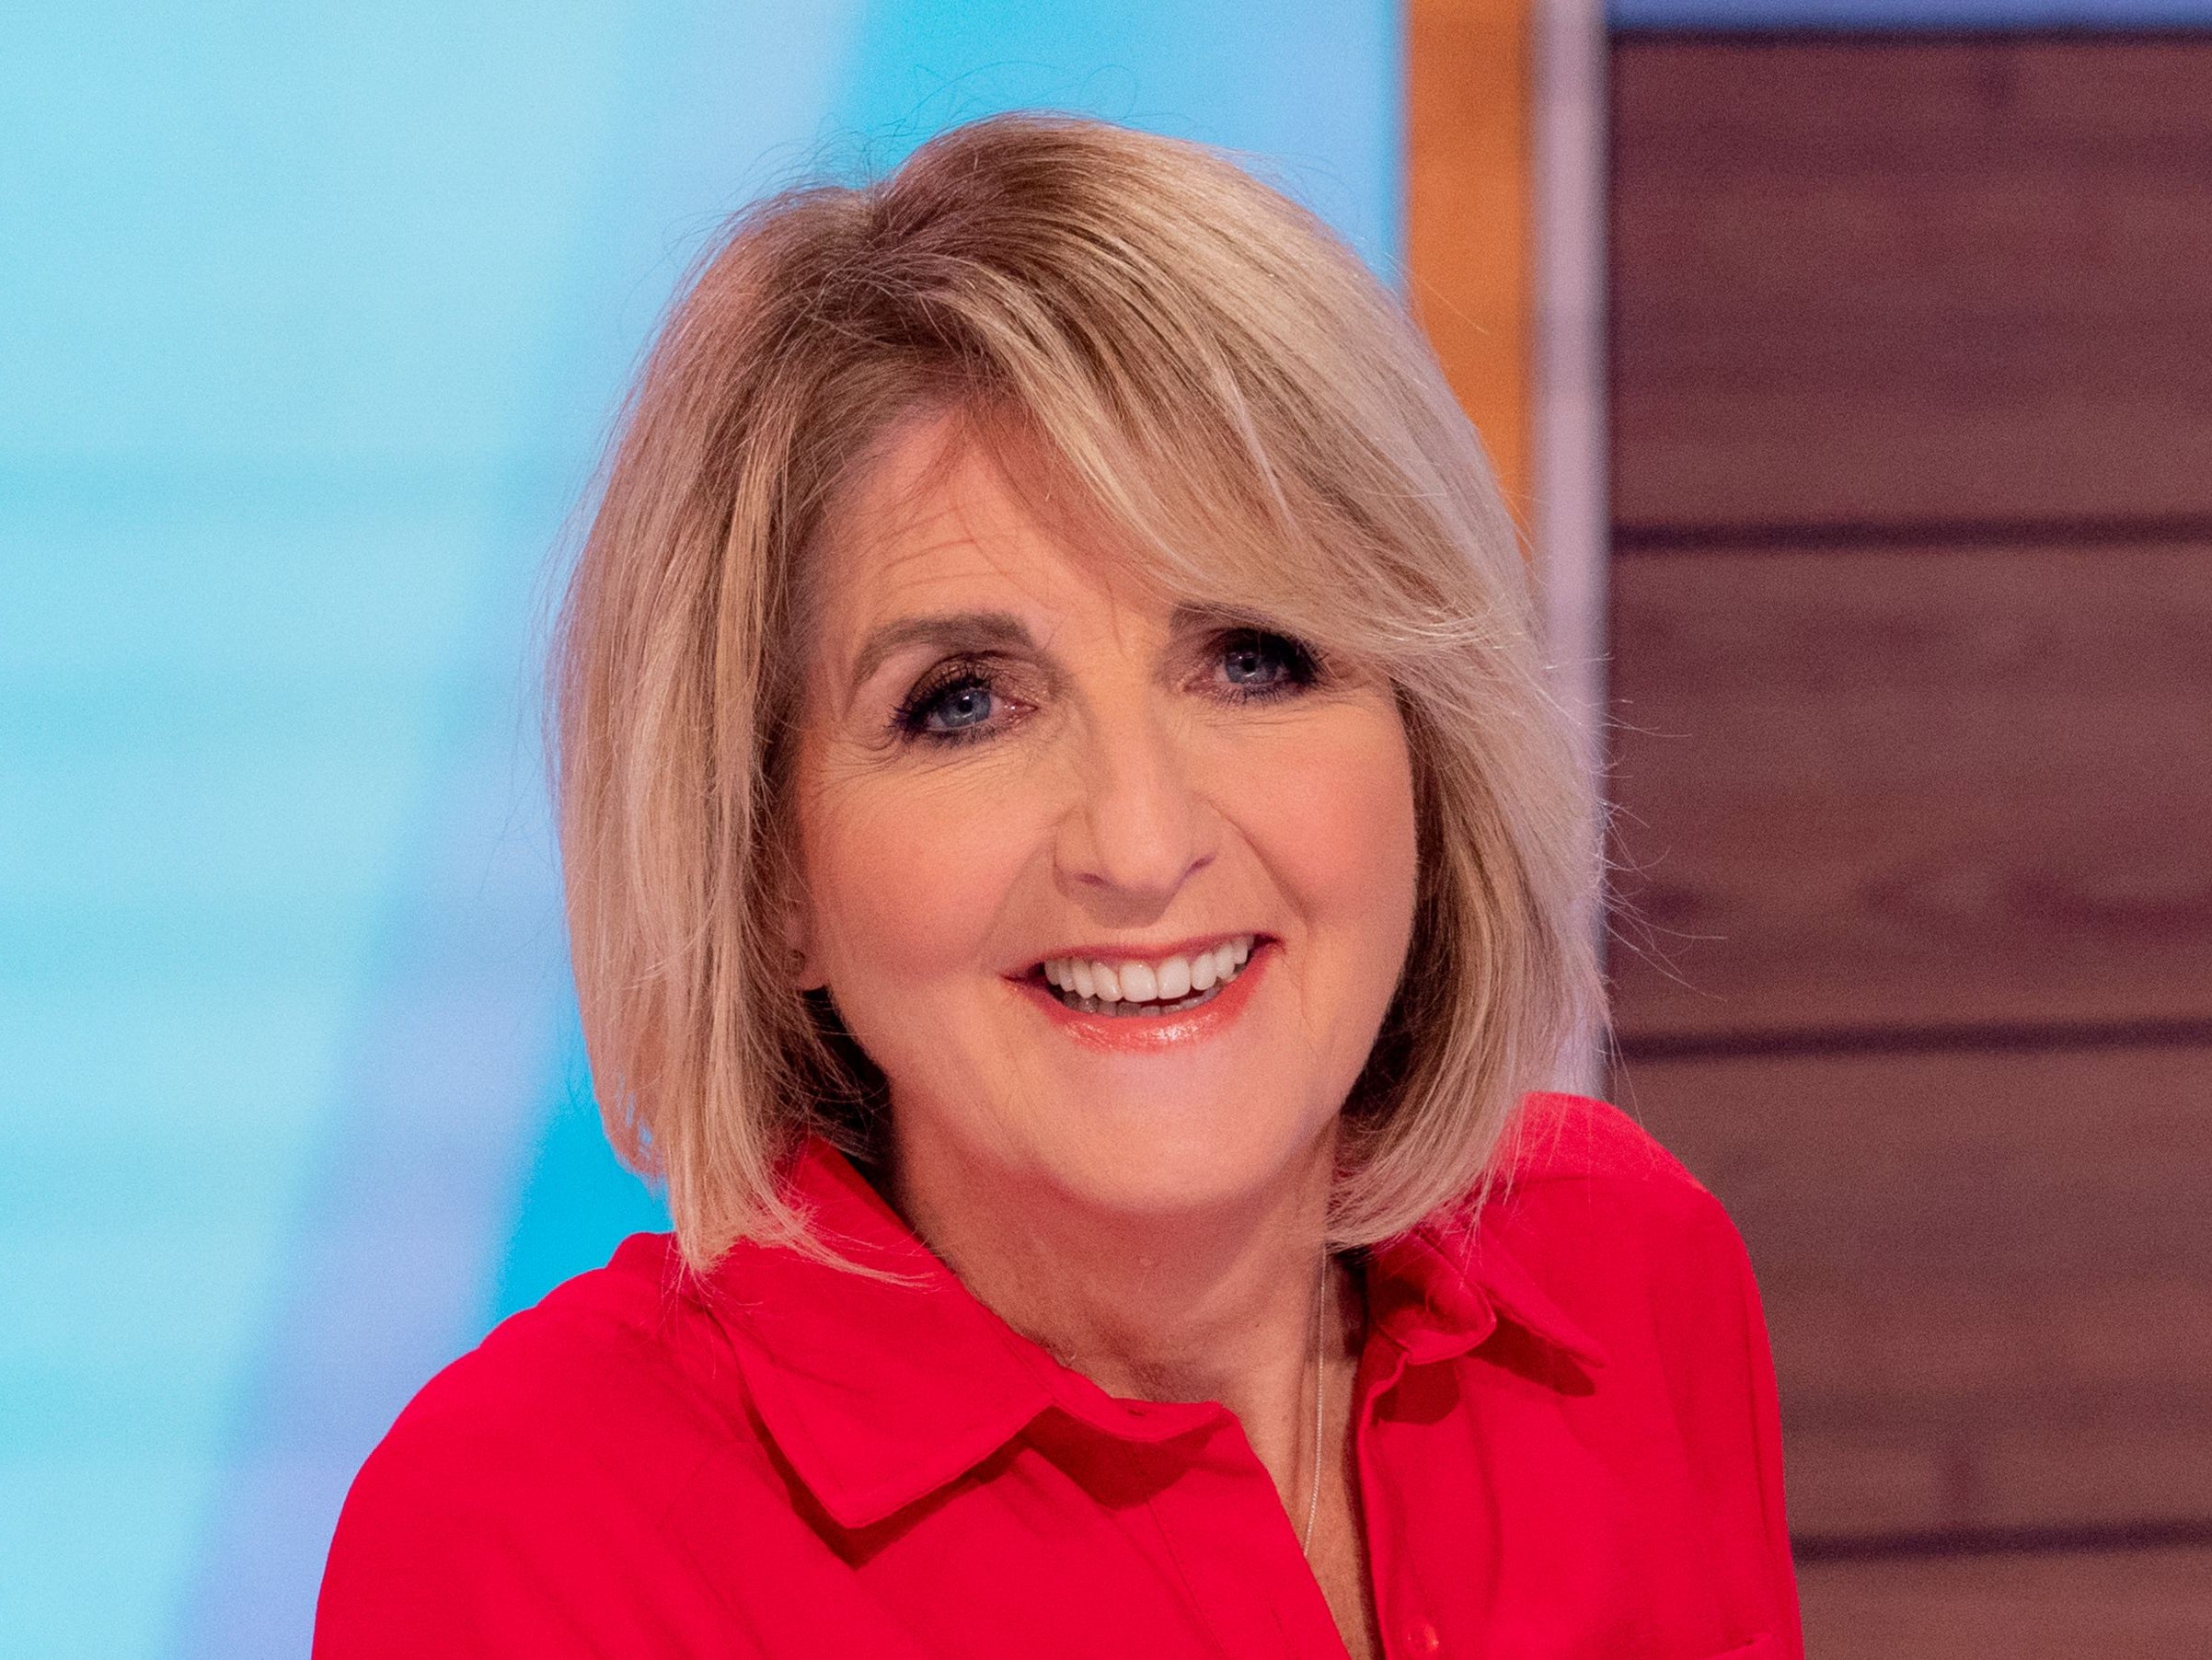 Kaye Adams has been defended by BBC over controversial Nicola Sturgeon comment